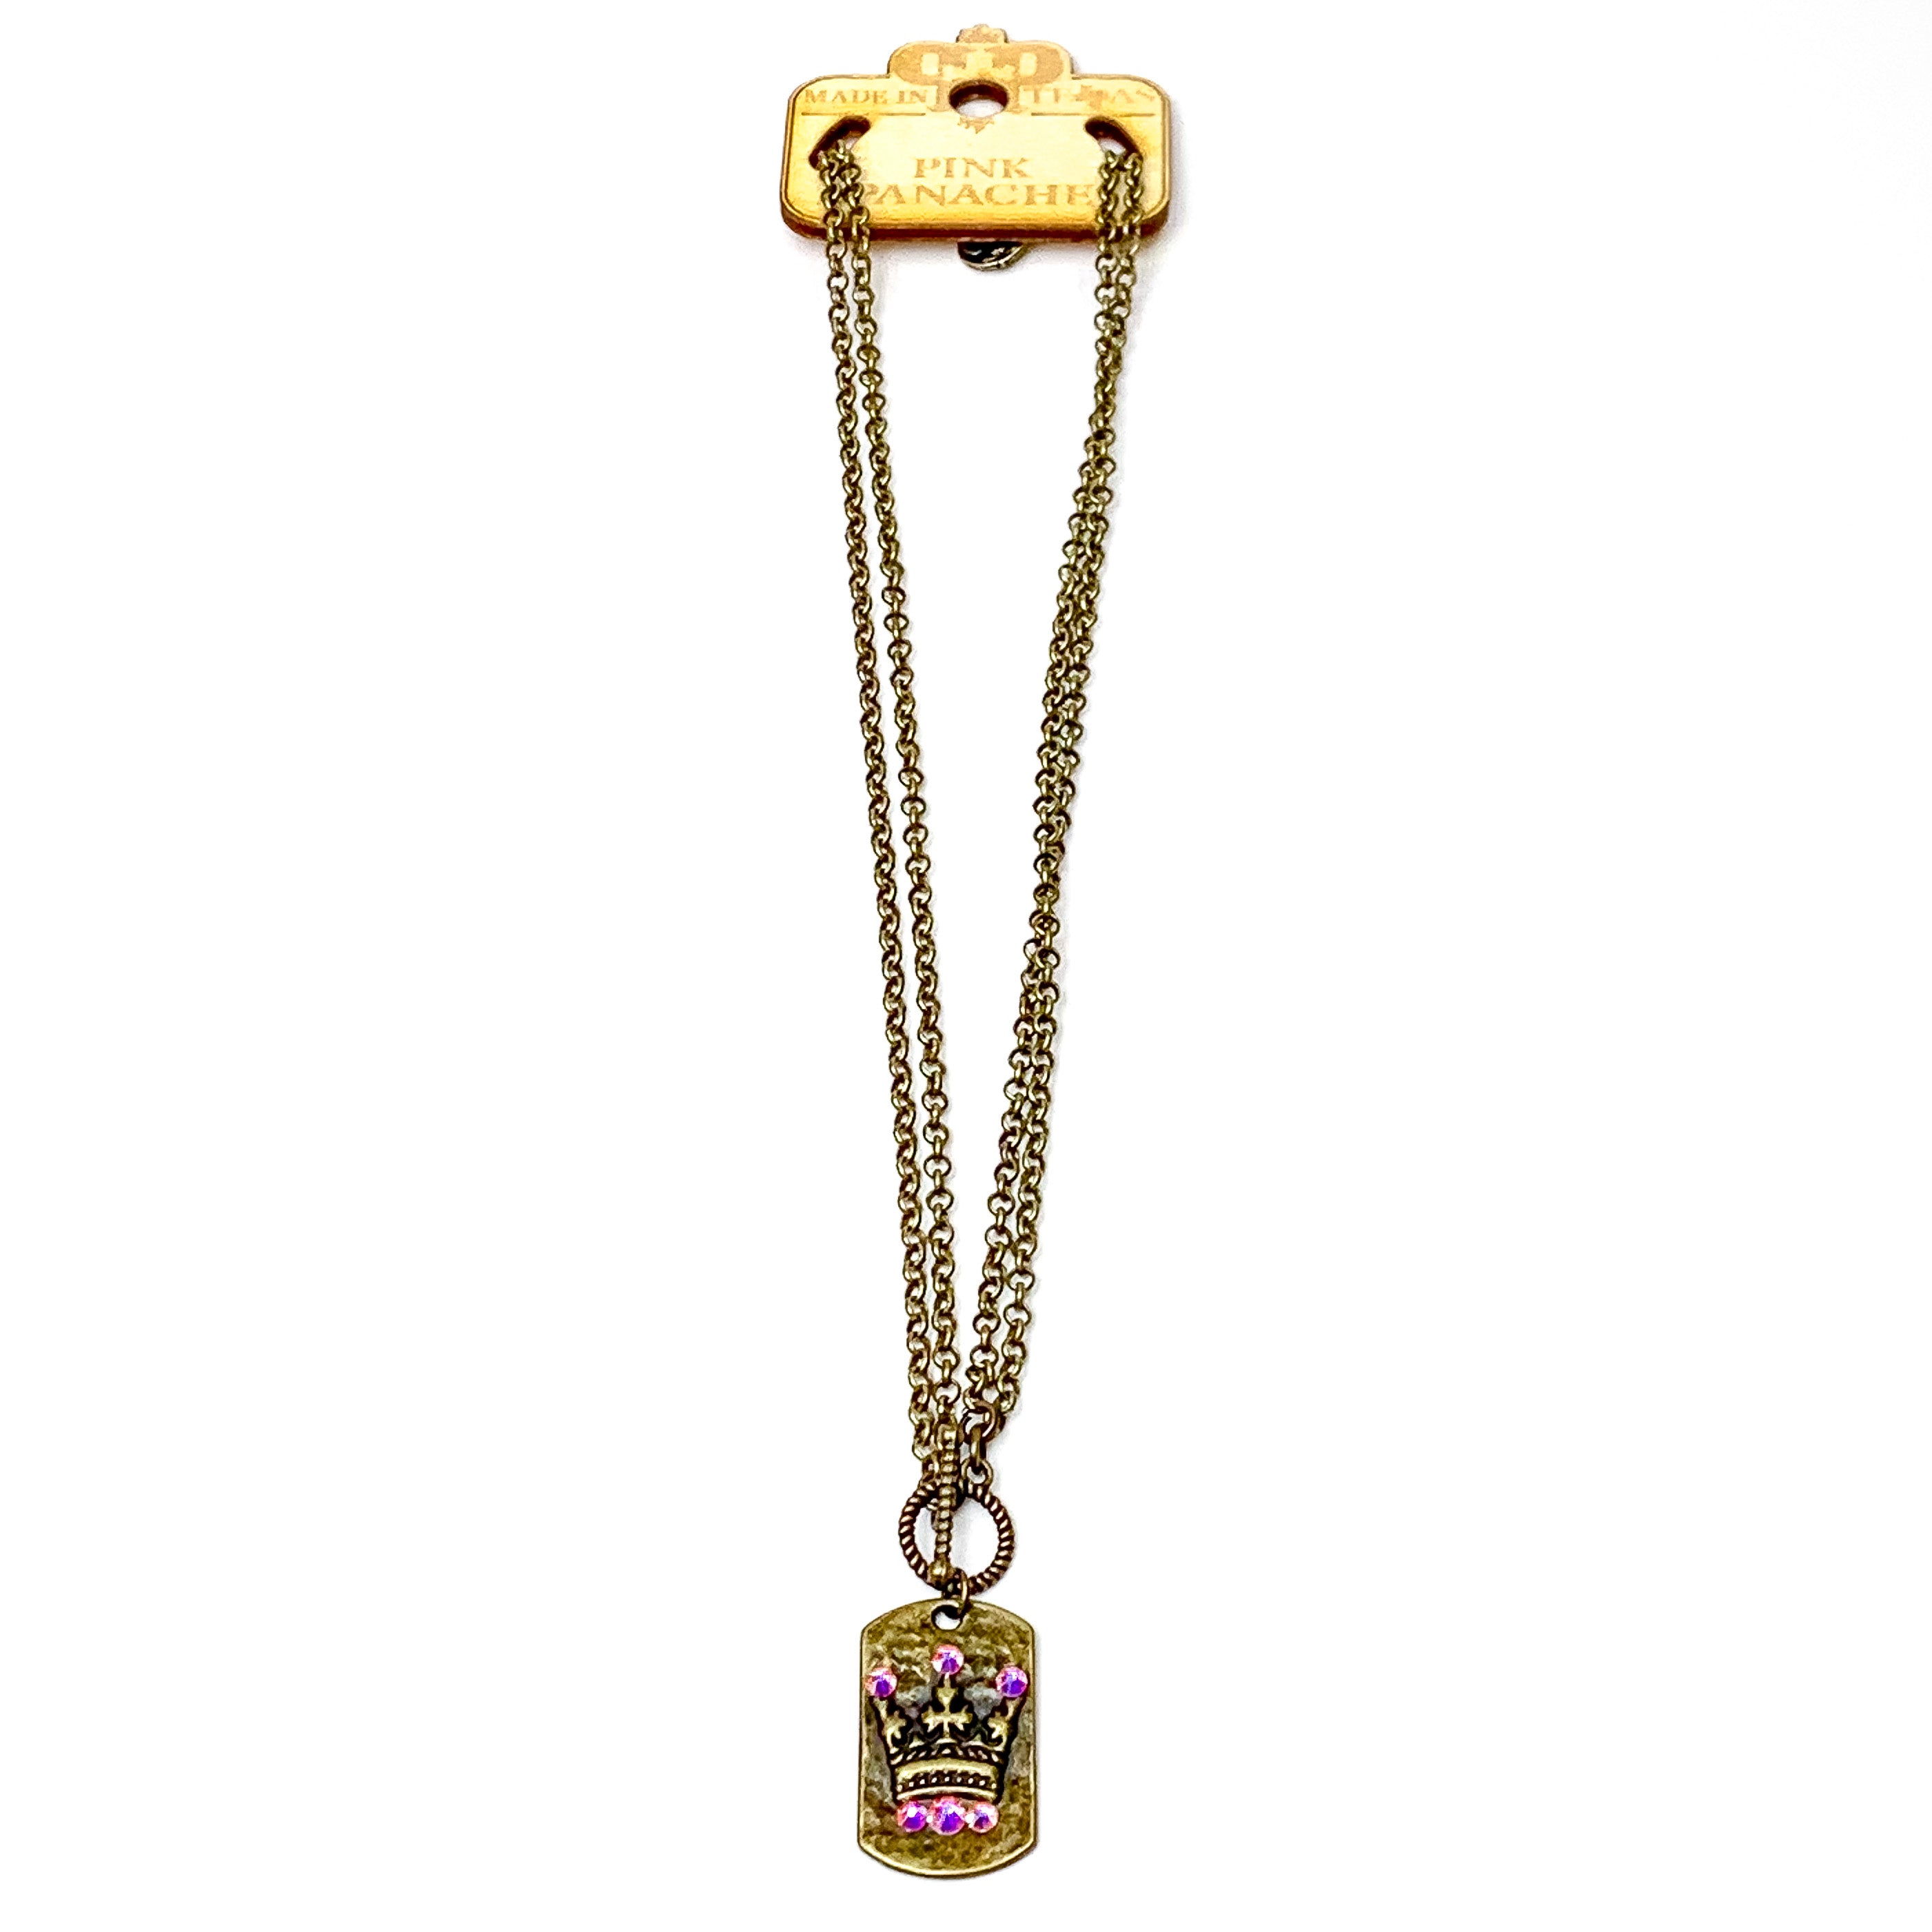 Pink Panache | Crowned Jewel Bronze Tone Necklace with AB Crystal Accents